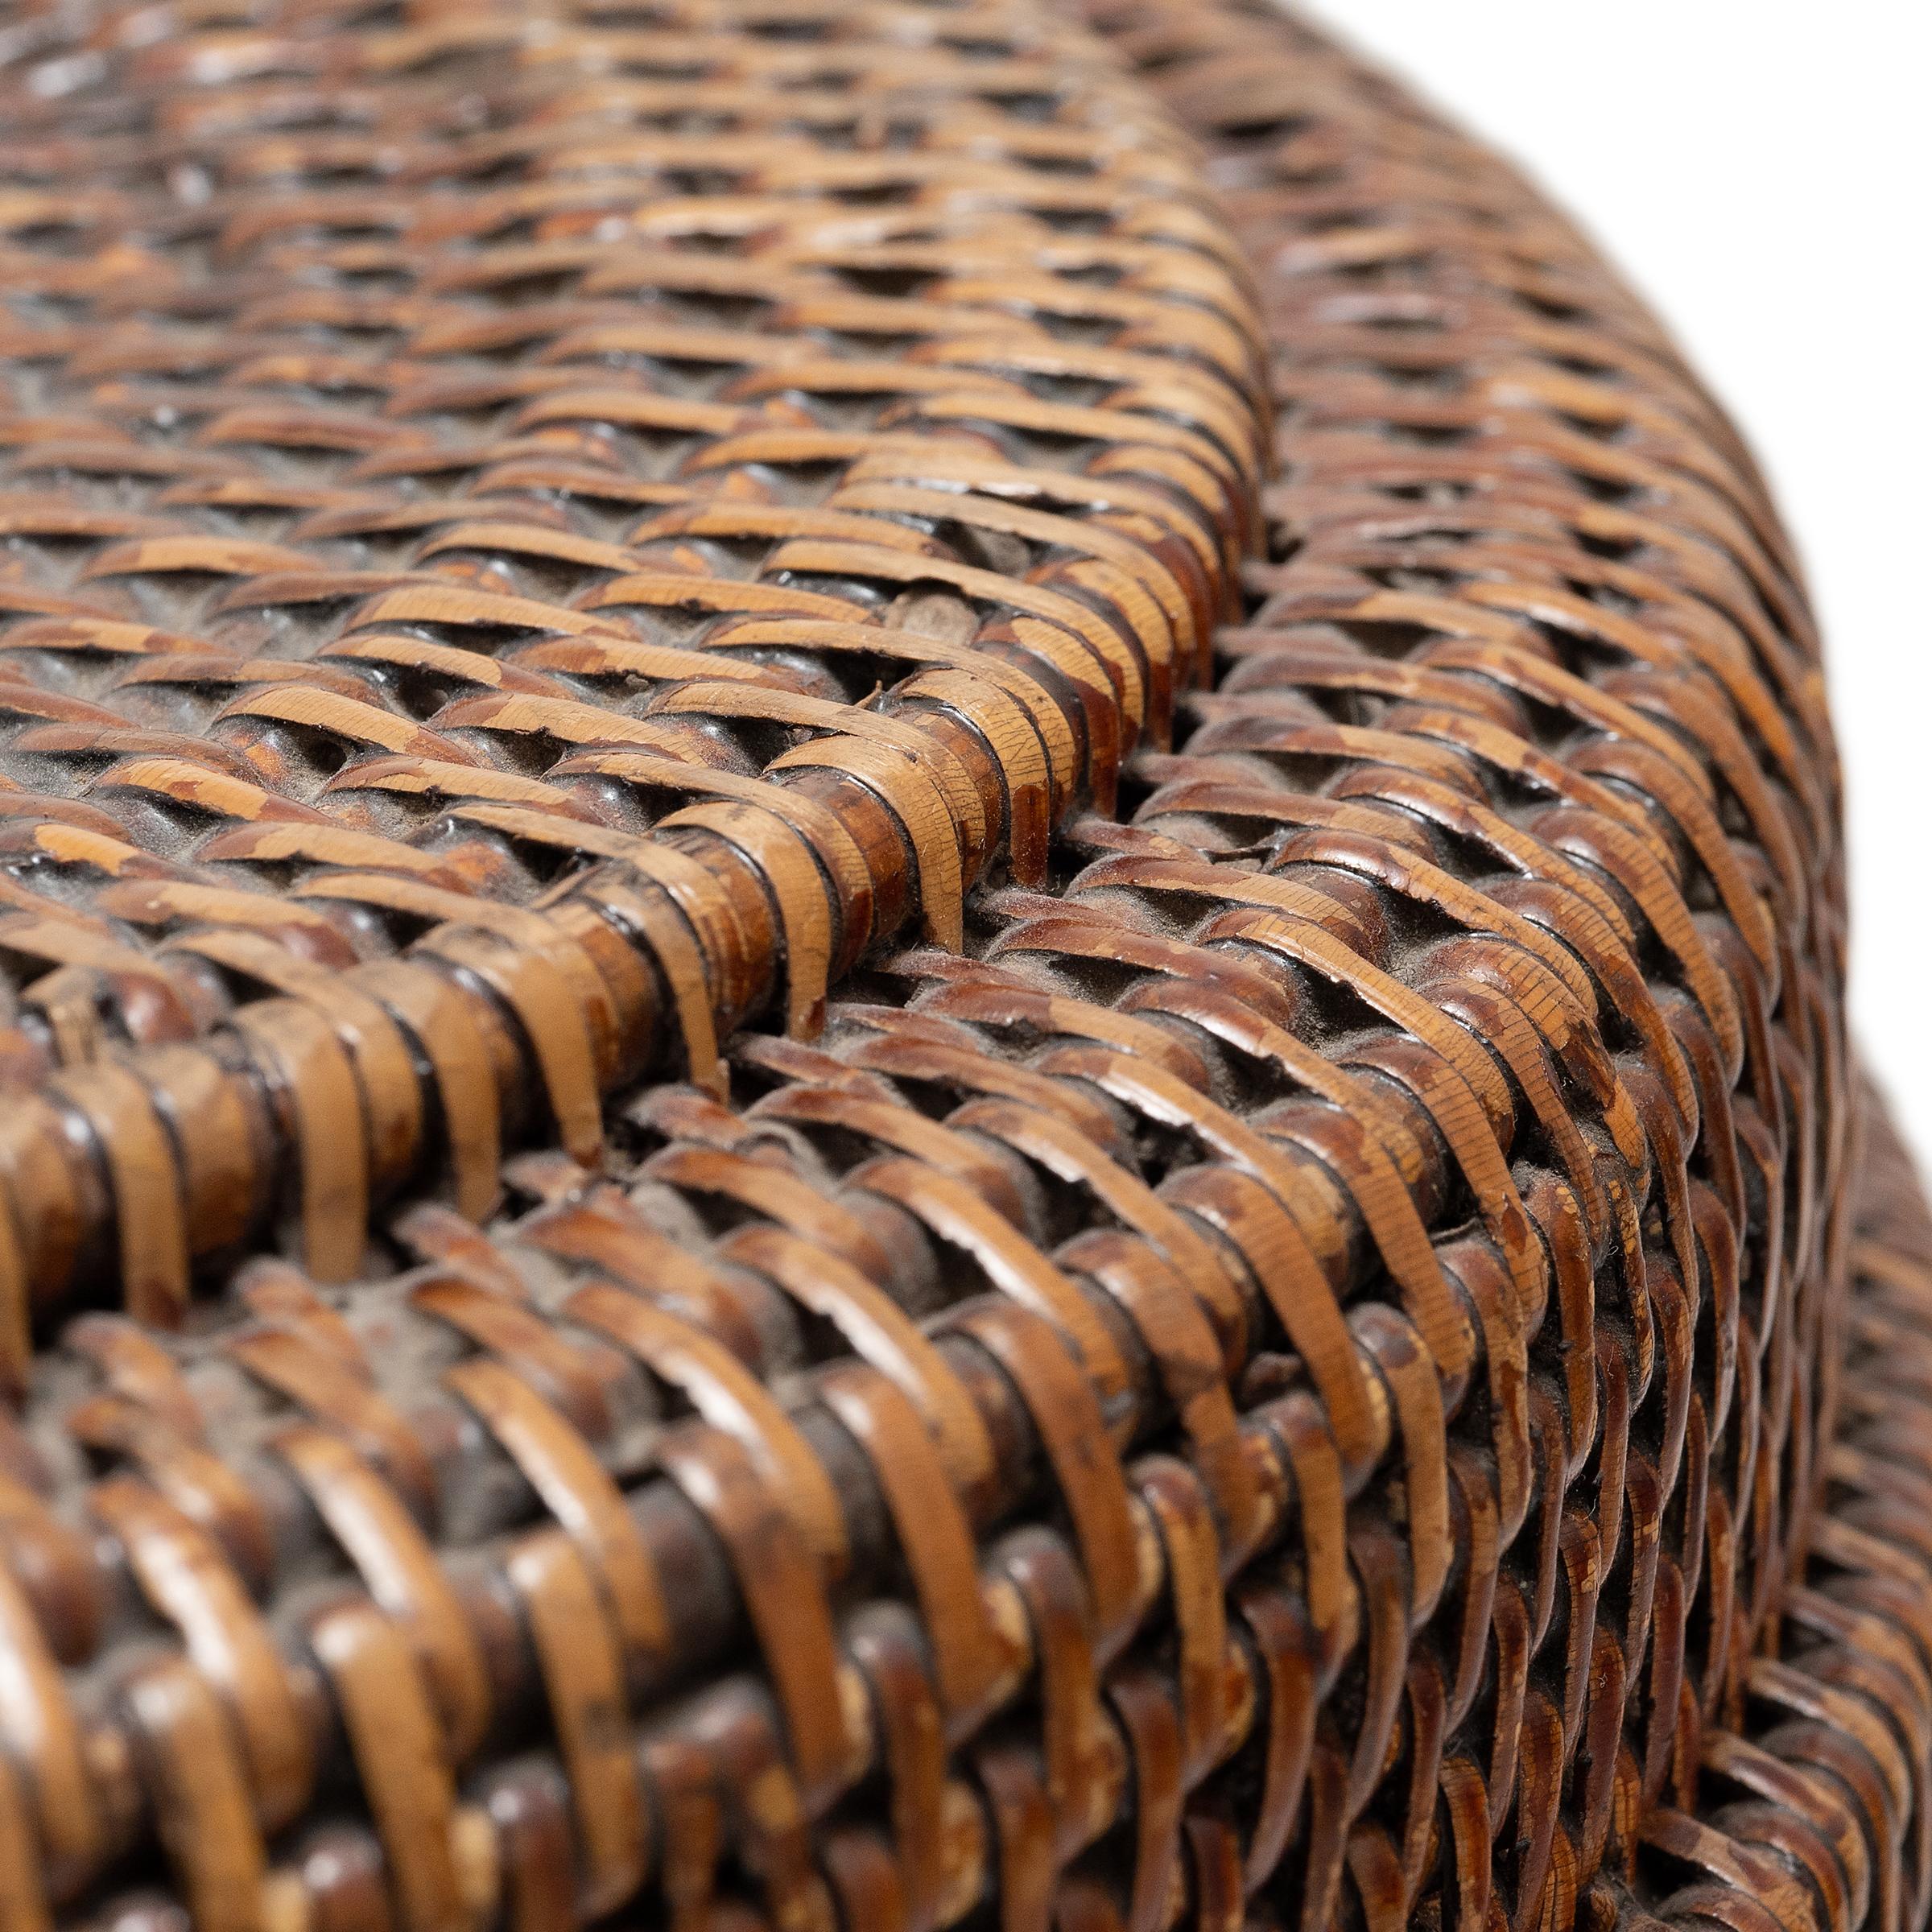 Hand-Woven Round Woven Chinese Box, c. 1850 For Sale